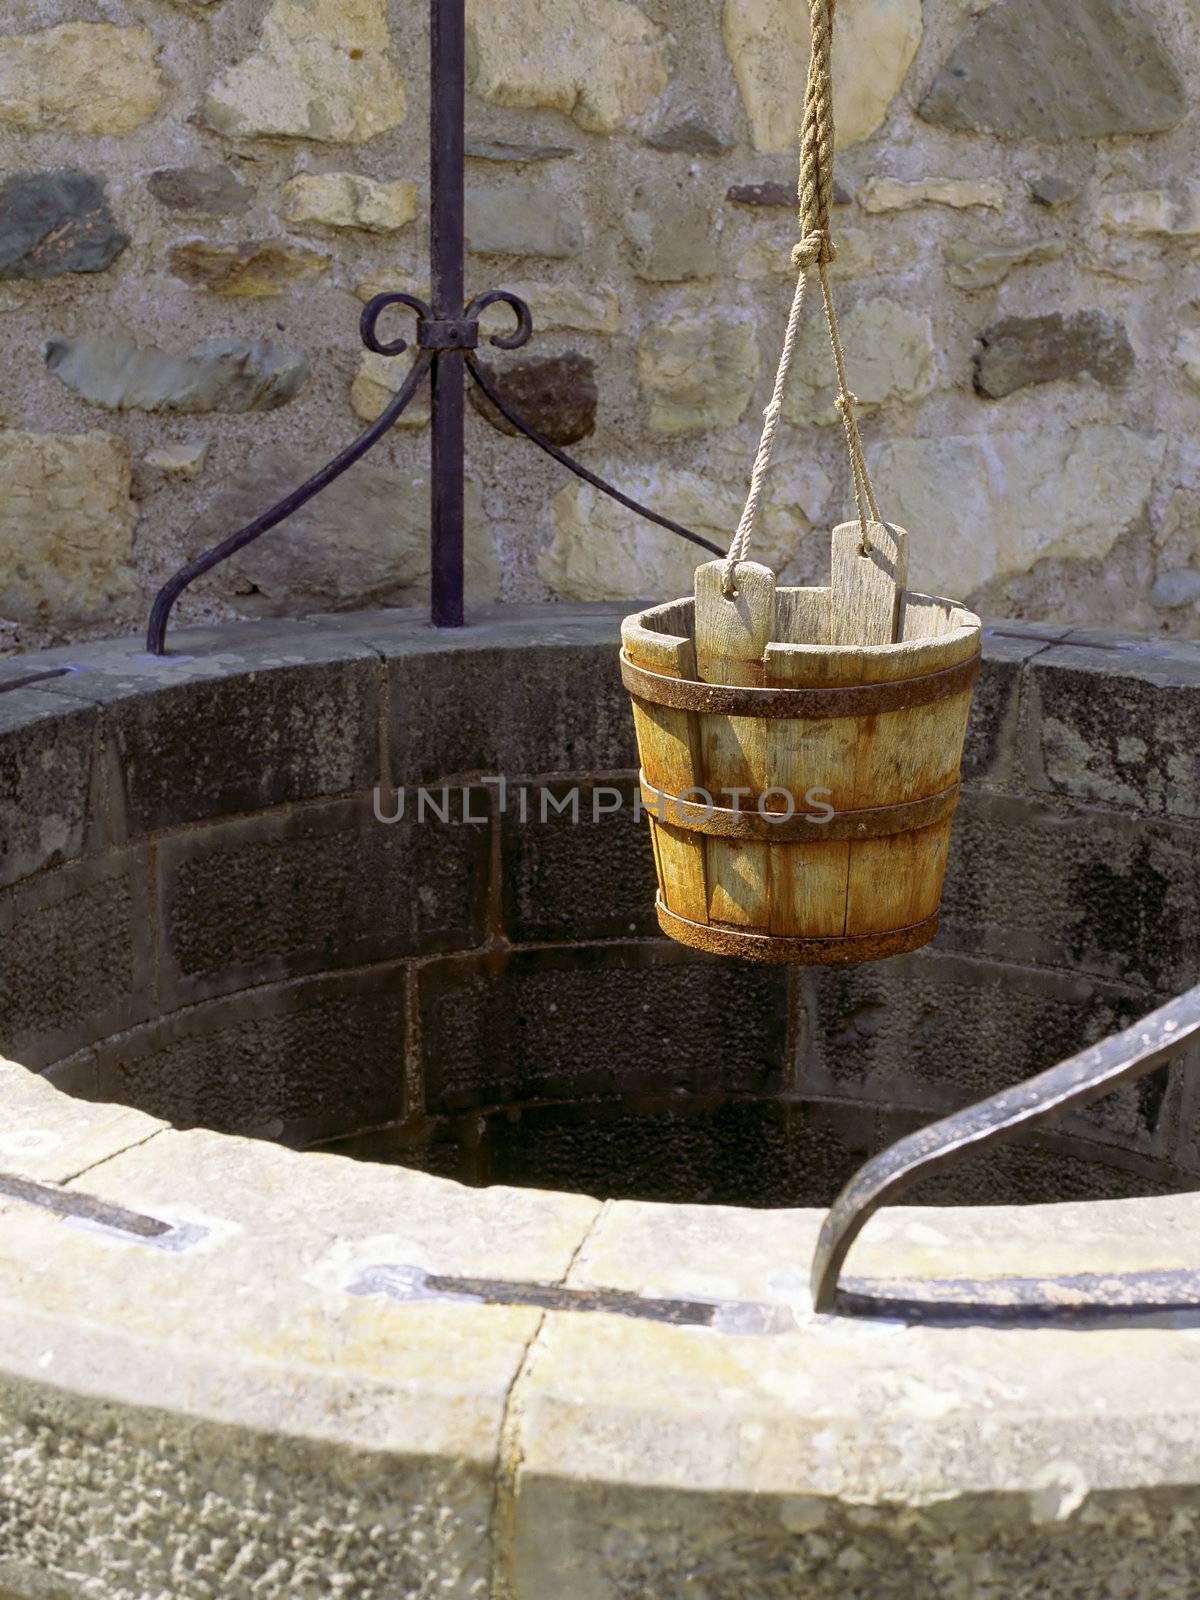 A water well with an old bucket.